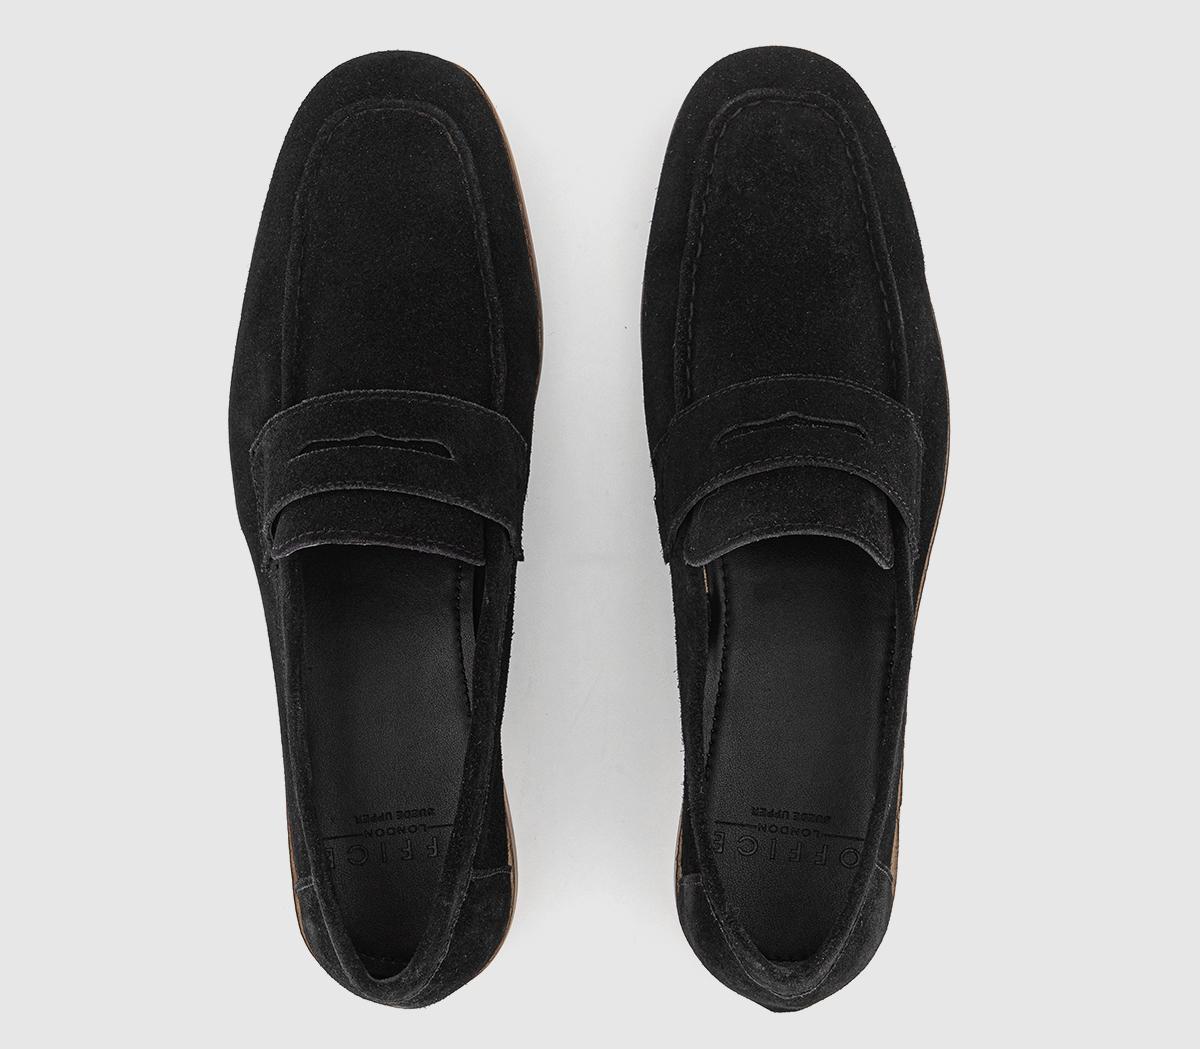 OFFICE Colbert Saddle Loafers Black Suede - Men’s Loafers